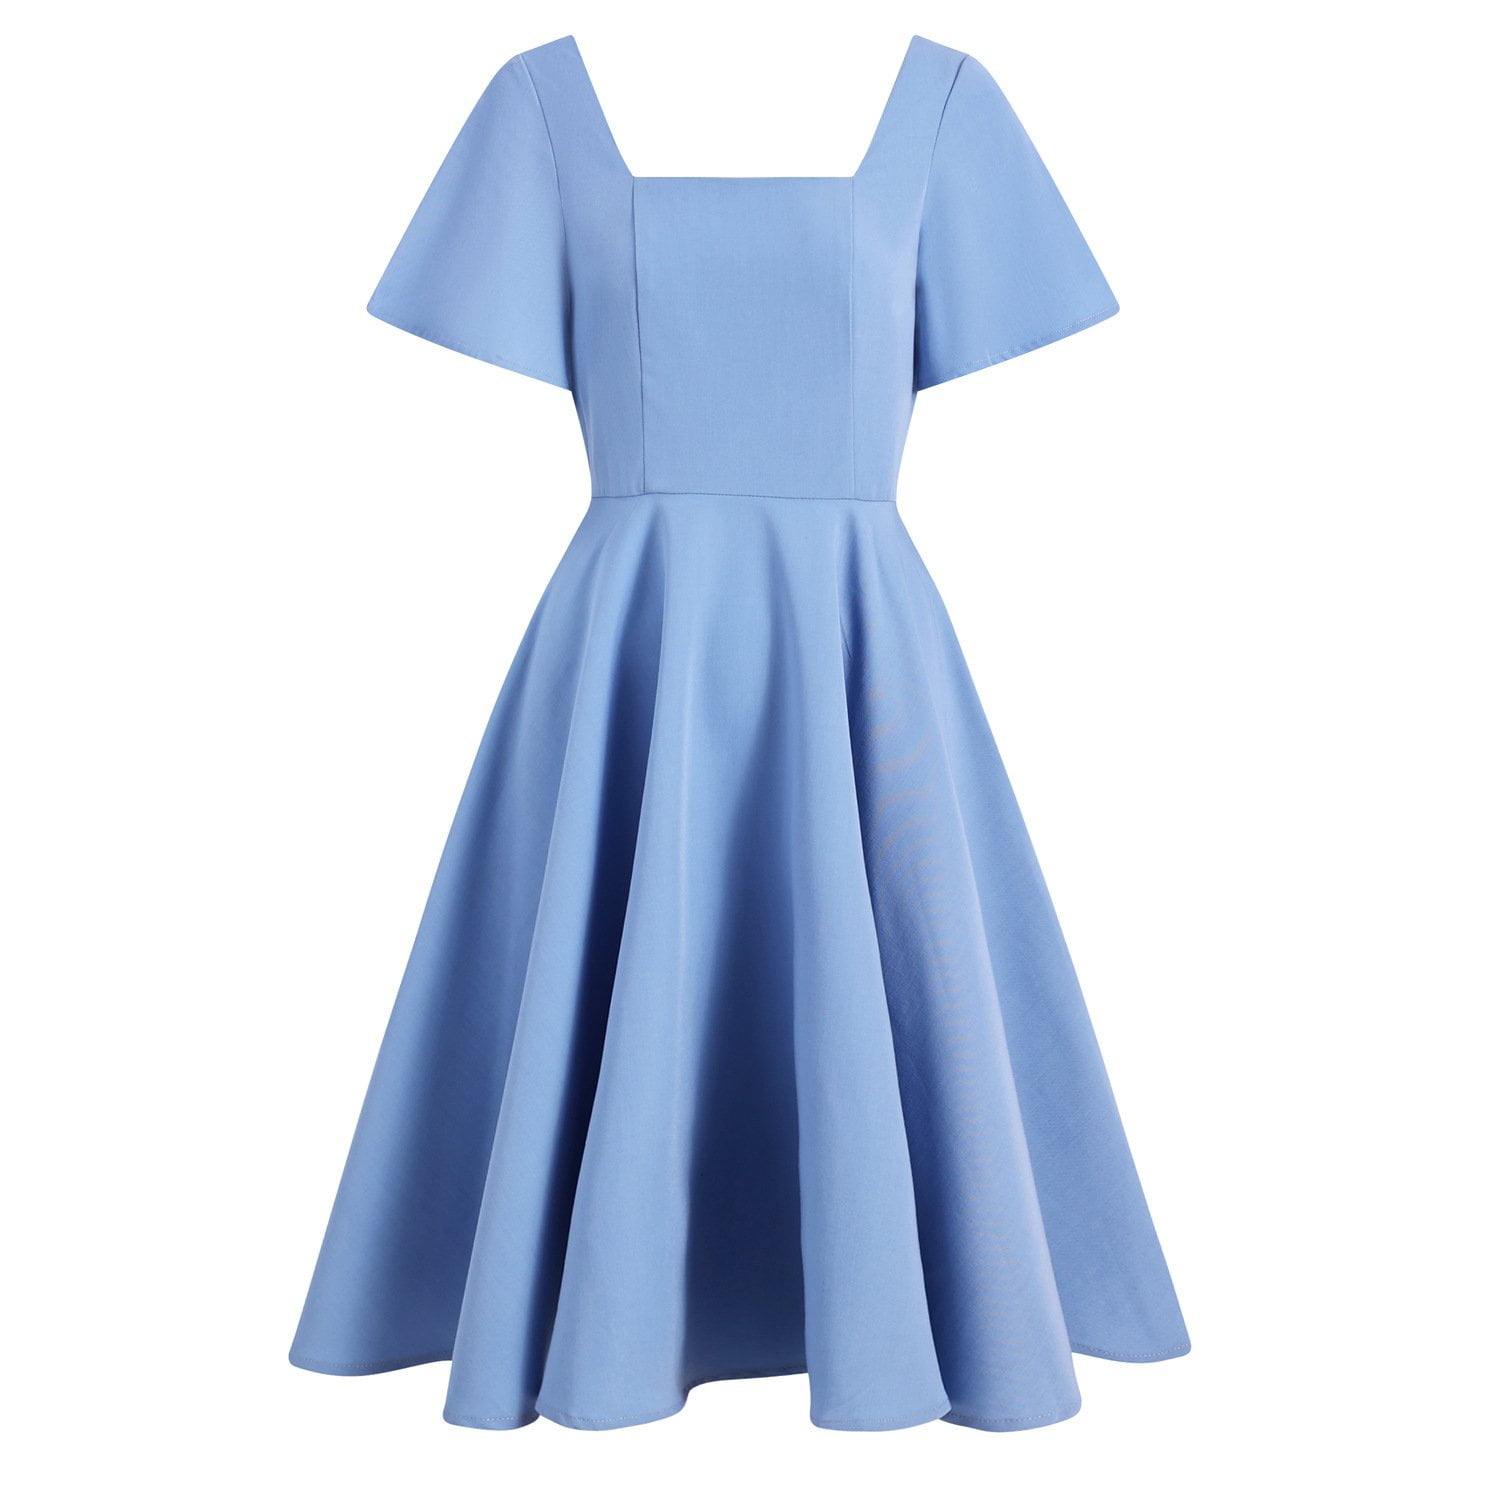 1950s Dress Square Collar Ruffled Sleeve Backless A-line Vintage Swing ...